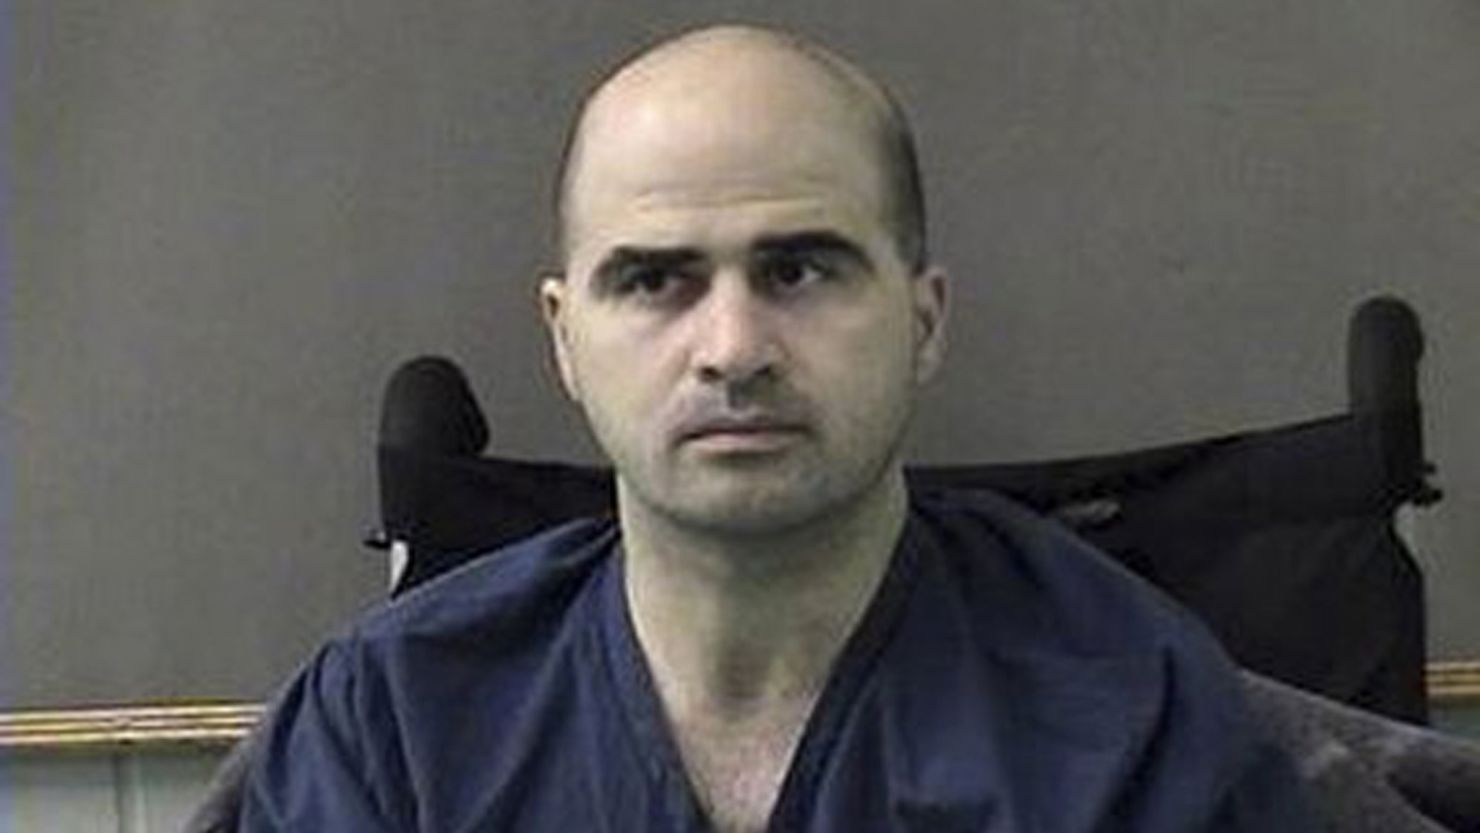 Maj. Nidal Hasan is accused of killing 13 and wounding 32 others in November 2009.